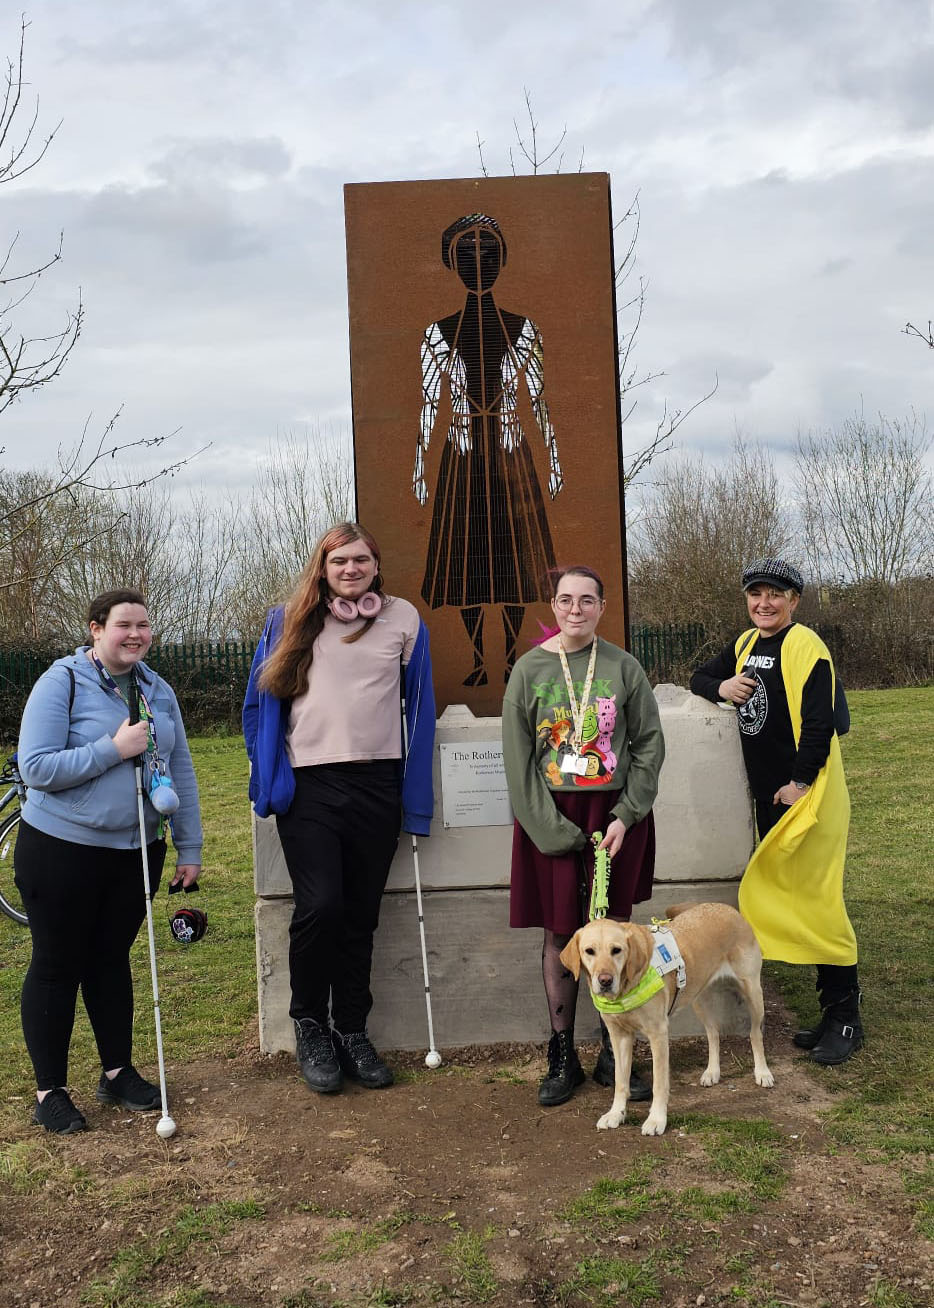 The group from RNC stand in front of the newly unveiled Rotherwas Angel